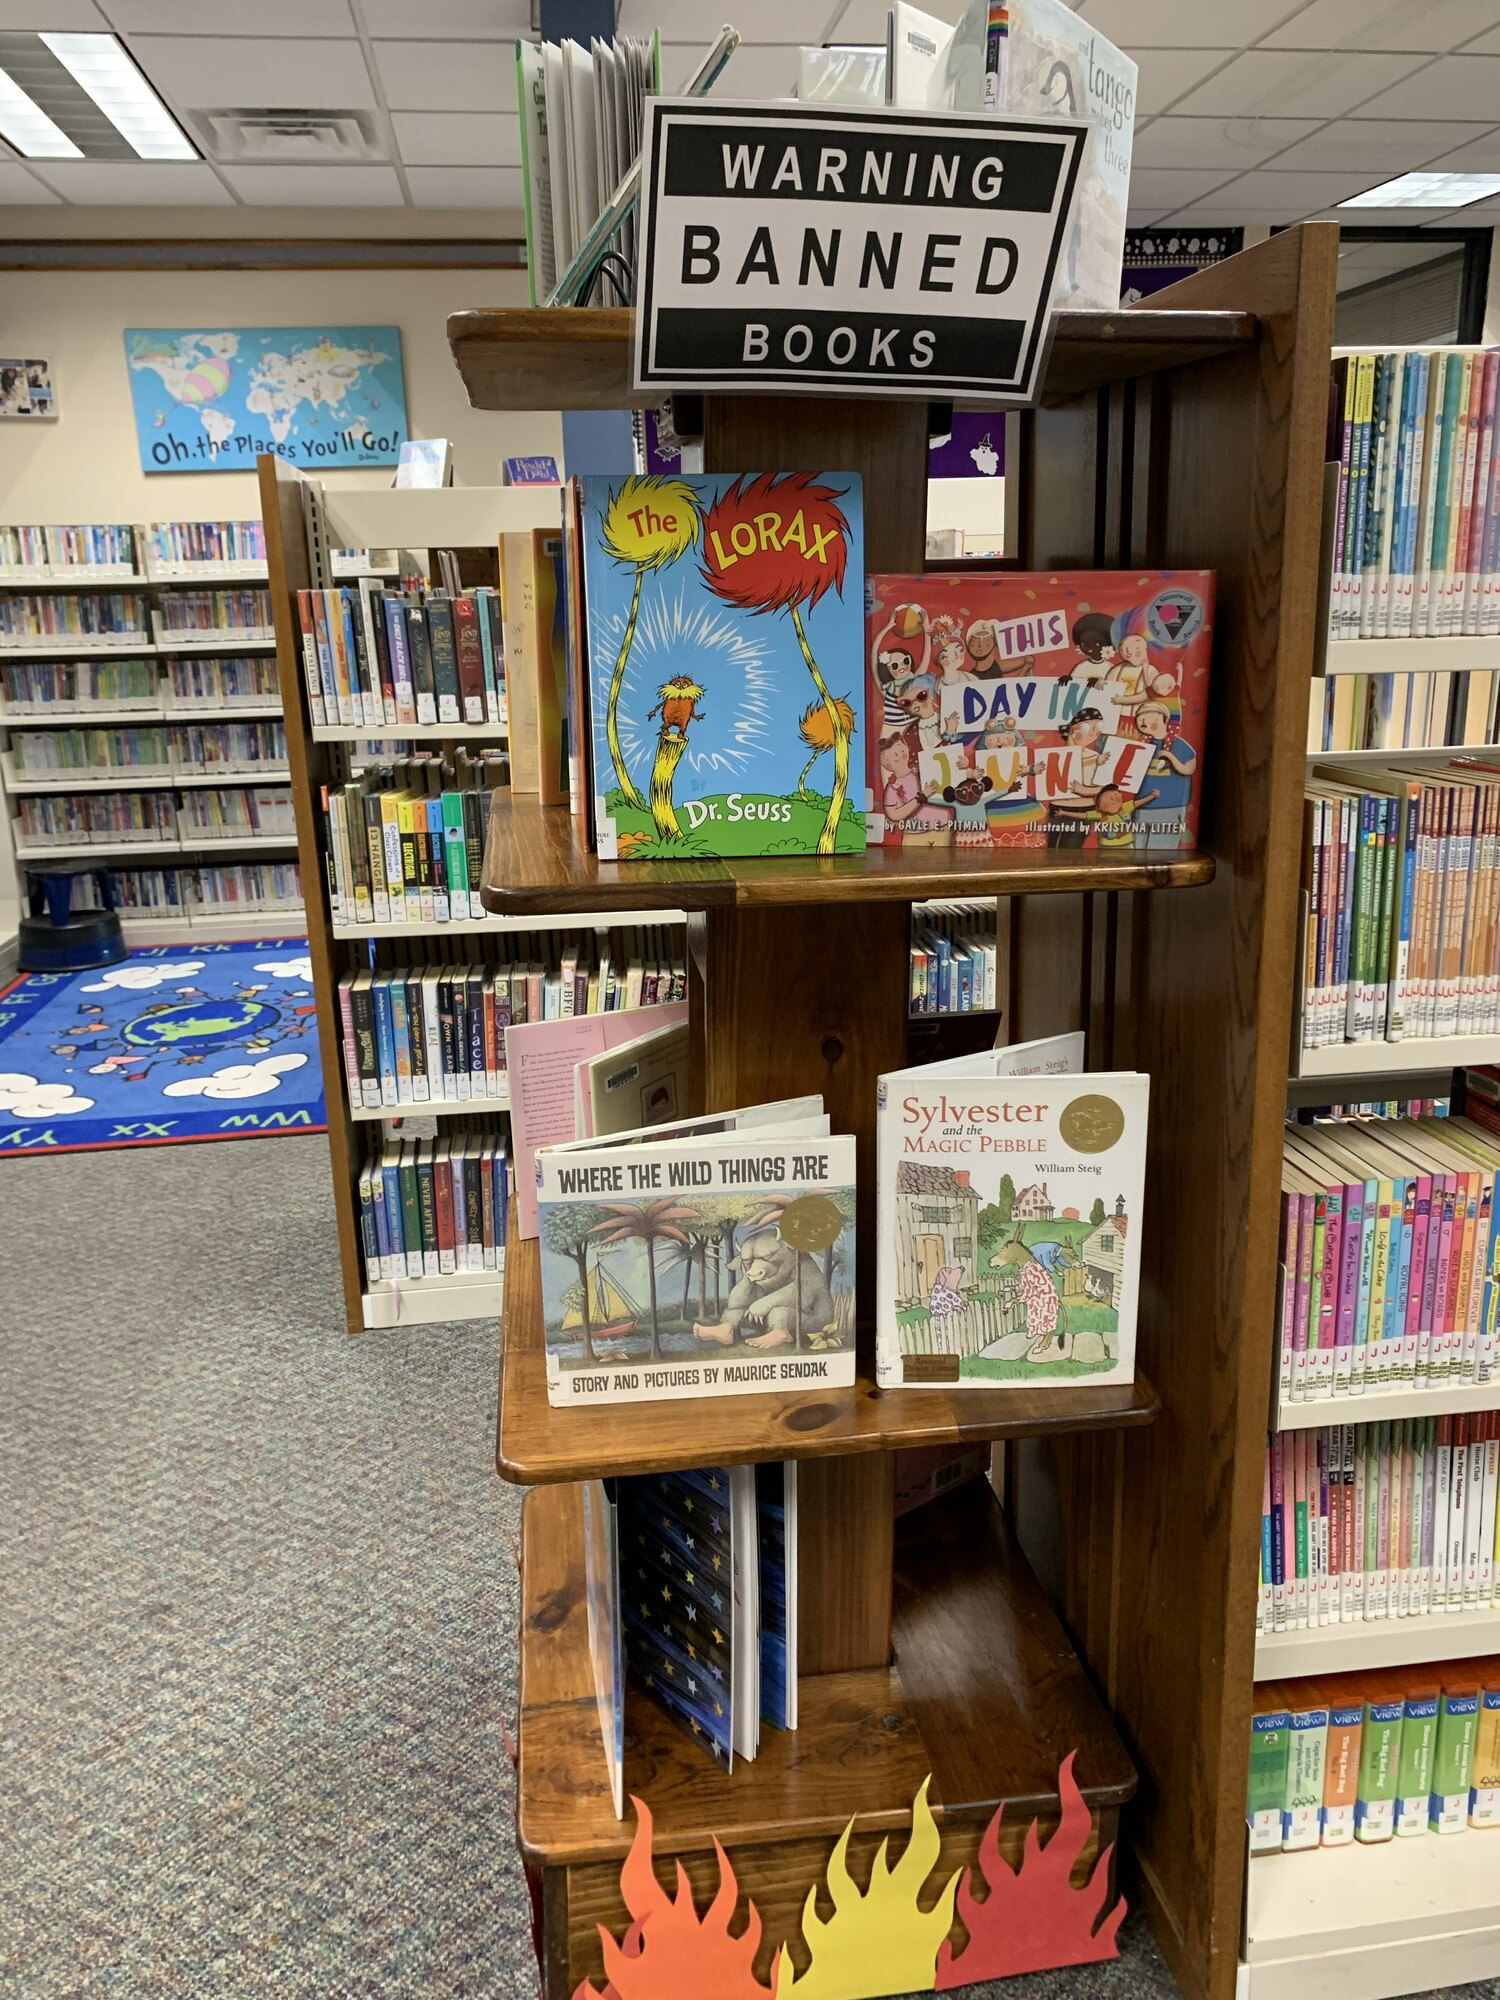 A scene from the banned books display at Hampton Bays Public Library. ALEX GIRESI